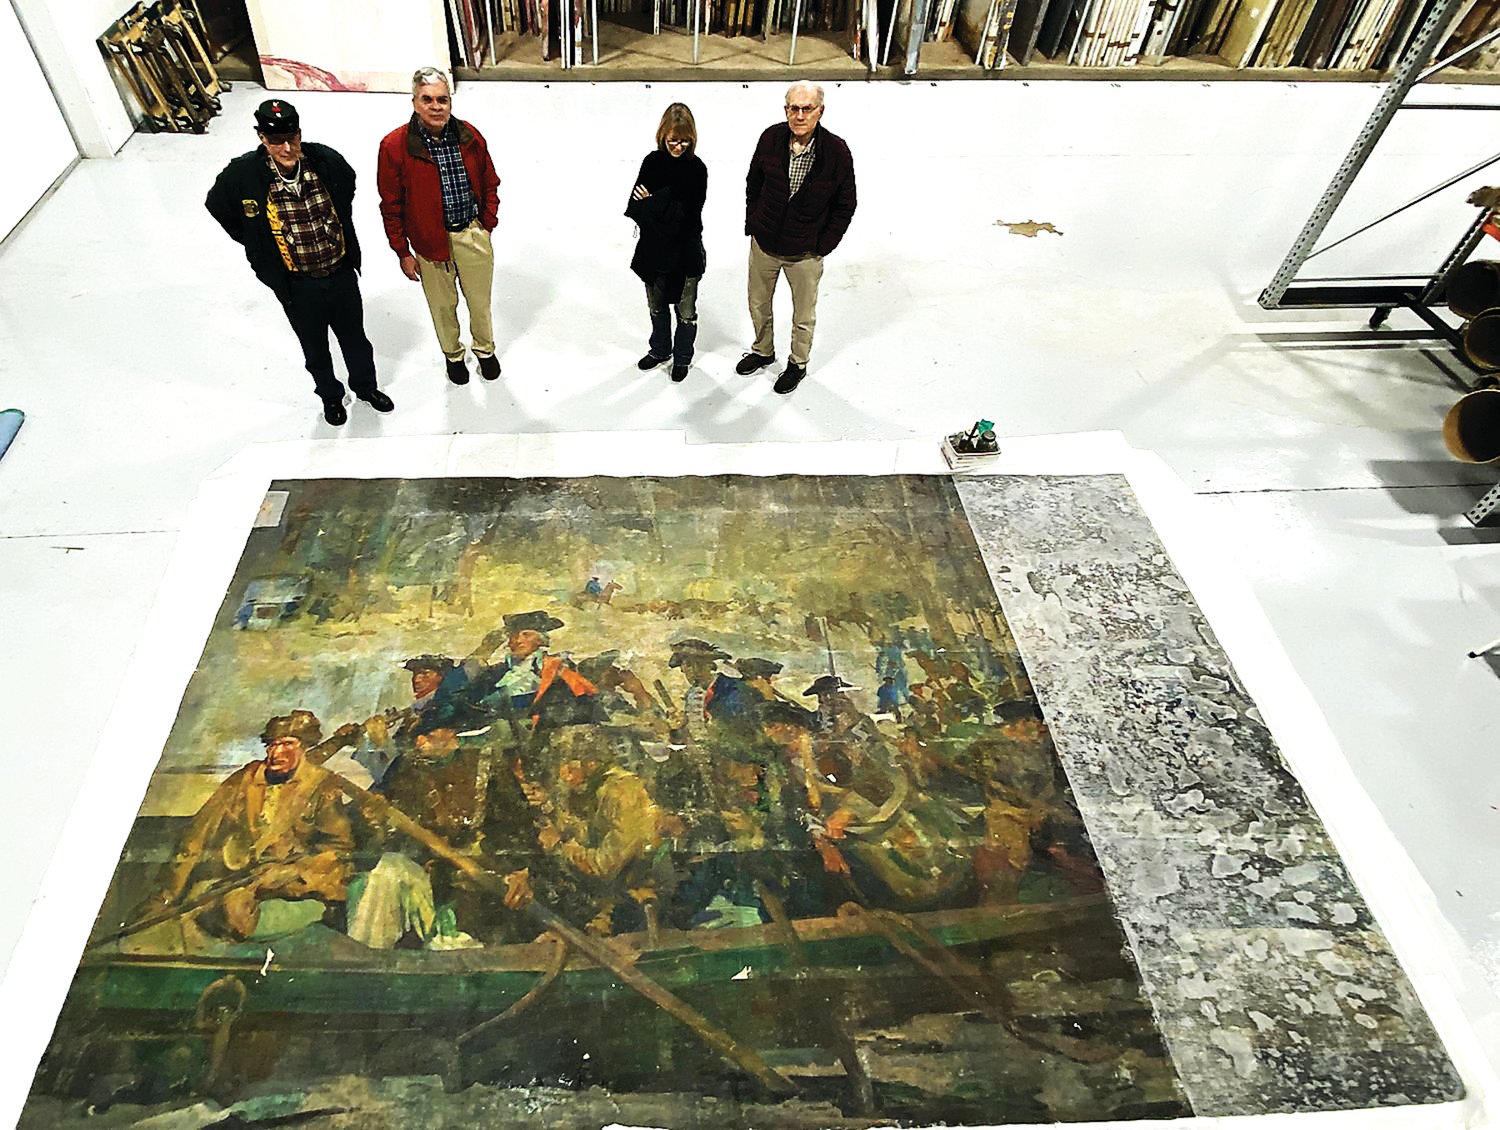 The recently rediscovered 15-foot, 6-inch by 9-foot, 8-inch mural by American muralist George Matthews Harding is in the care of conservator Christyl Cusworth, second from right, with Washington Crossing Park Association trustees.